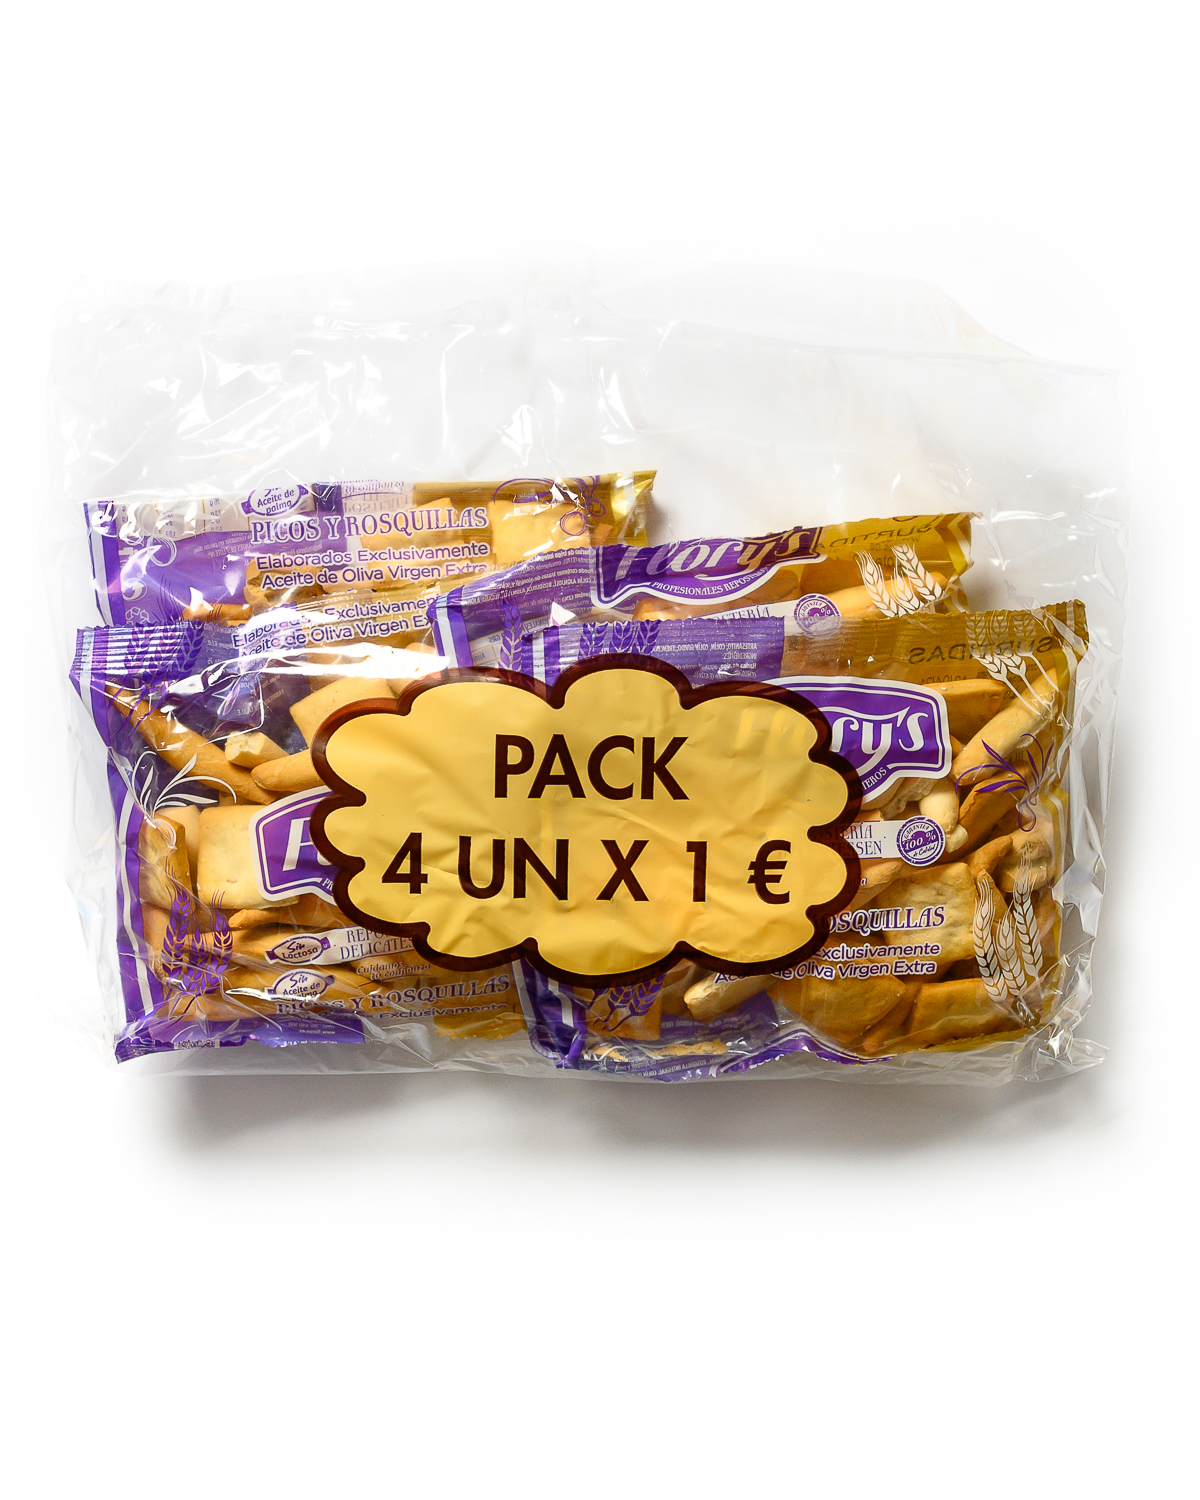 PACK SURTIDA 10UNX320GRS(4-80GRS)